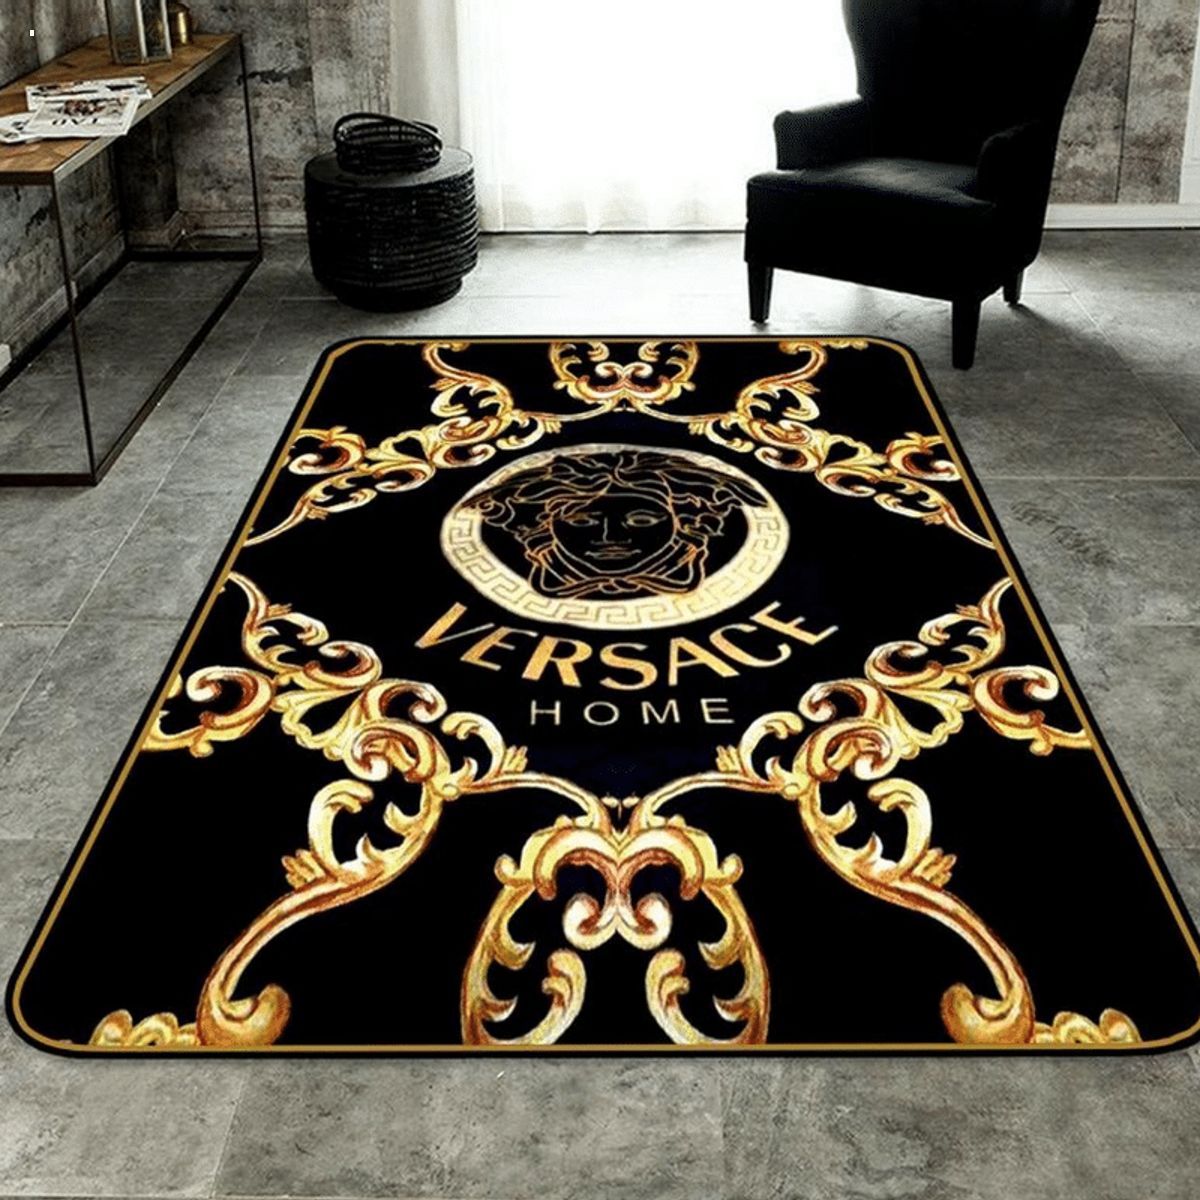 Versace Home Gold Mix Black Luxury Brand Carpet Rug Limited Edition